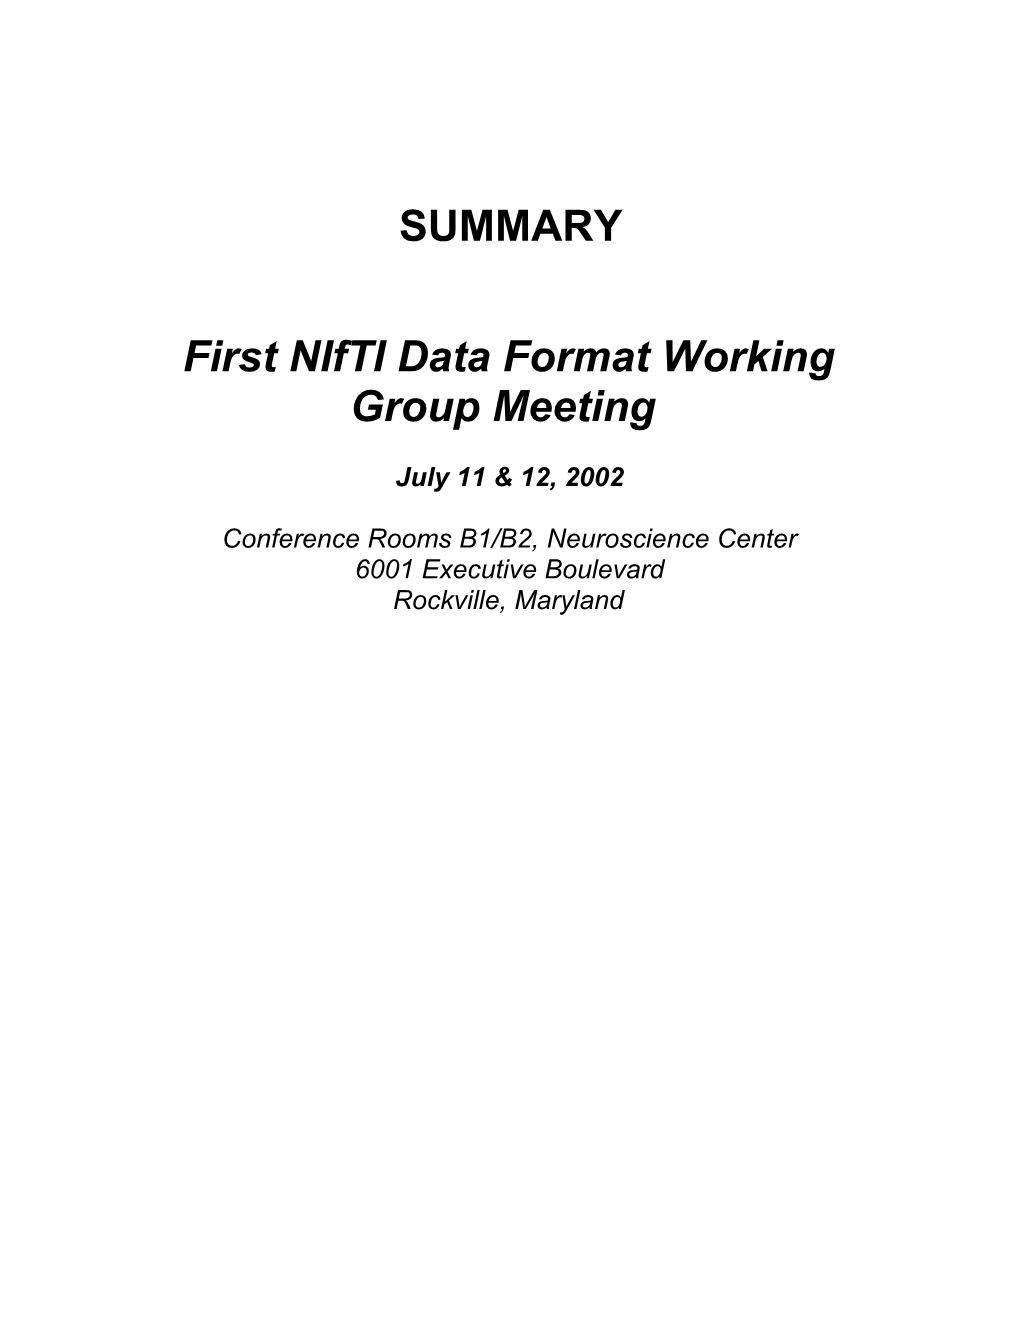 First Nifti Data Format Working Group Meeting